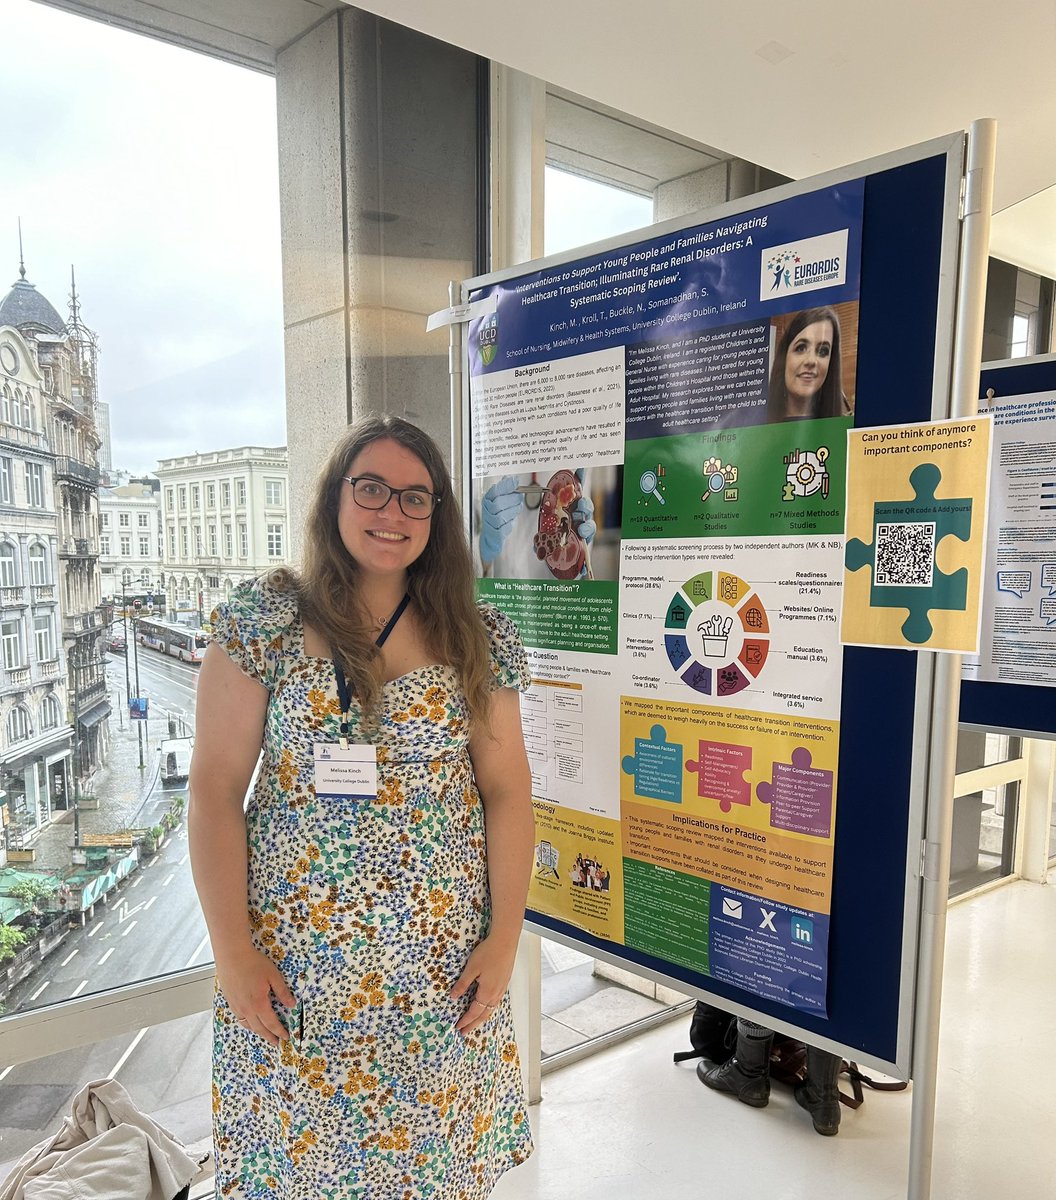 Delighted to be at the @eurordis #ECRD24. If you are joining us in Brussels, pop down to my poster to chat #HealthcareTransition or visit my online toolbox! ✨